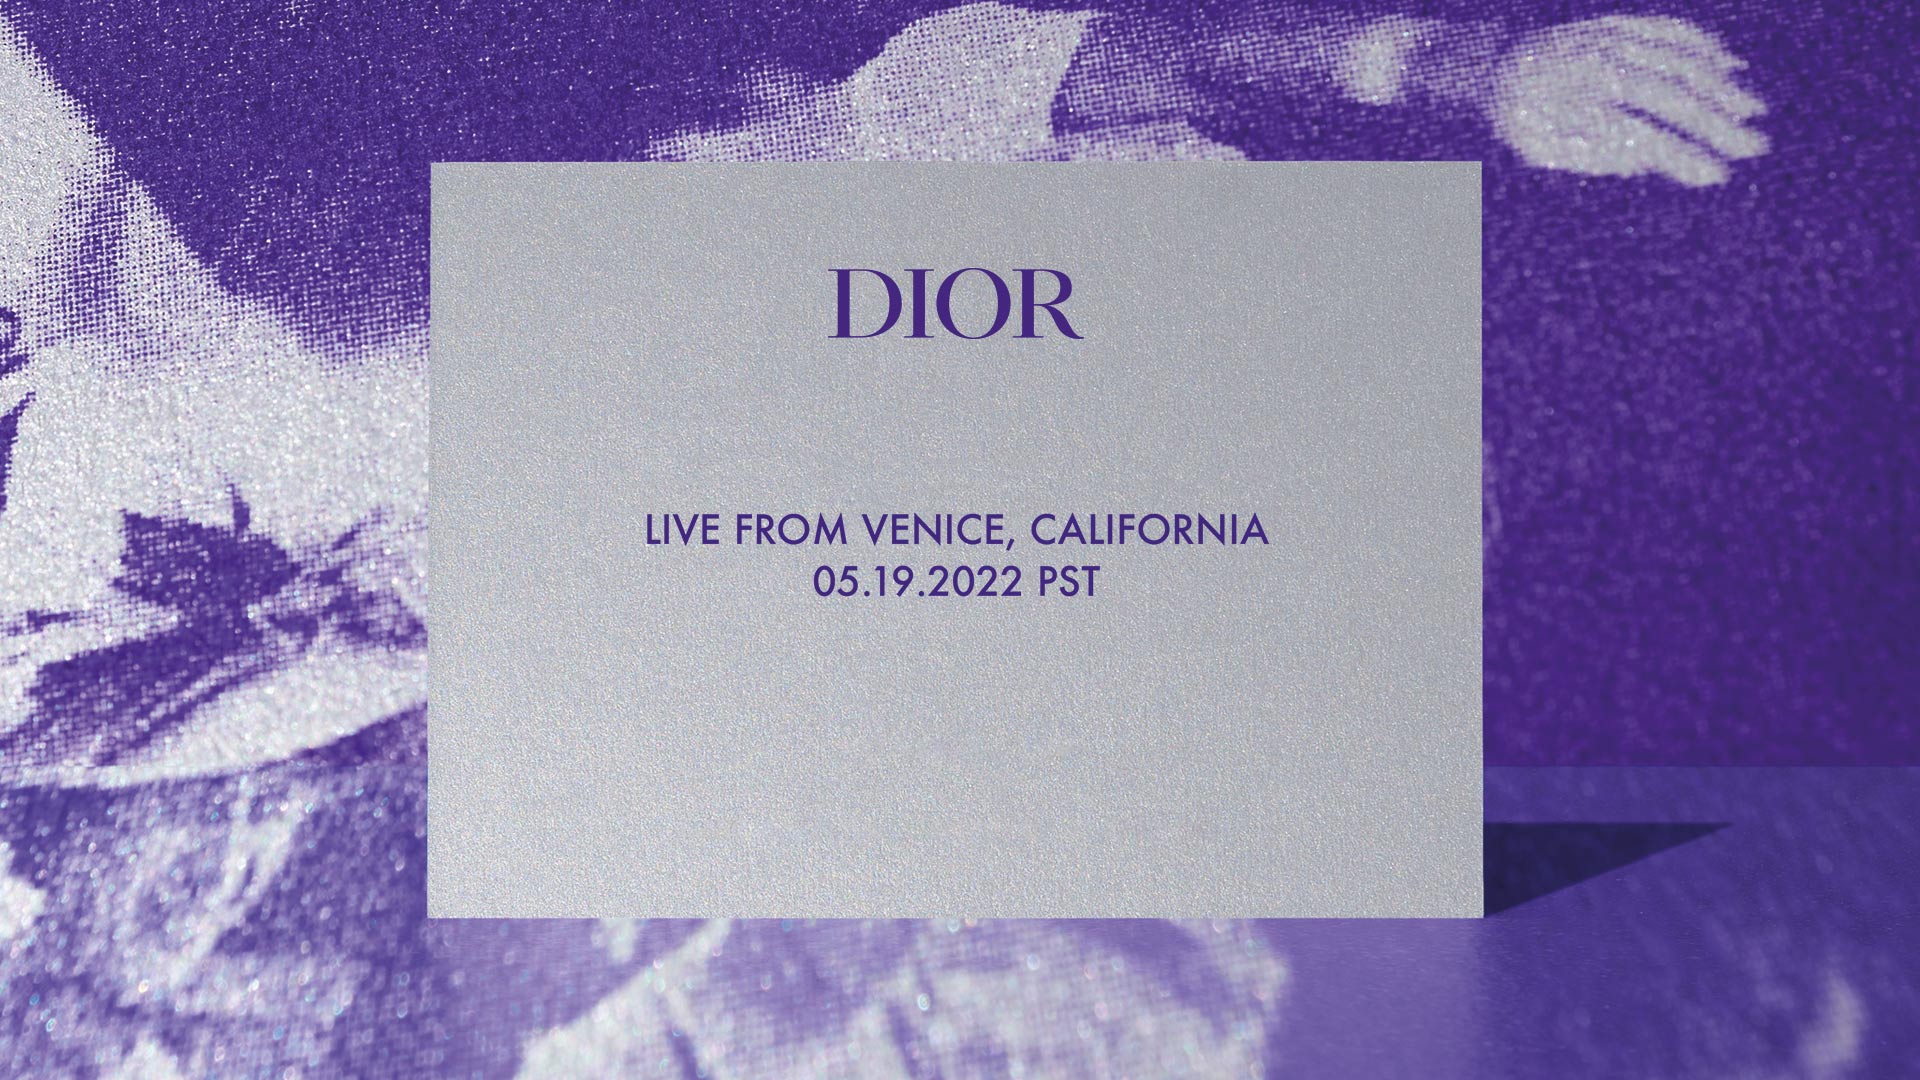 Watch the Dior Couture Runway Show Live